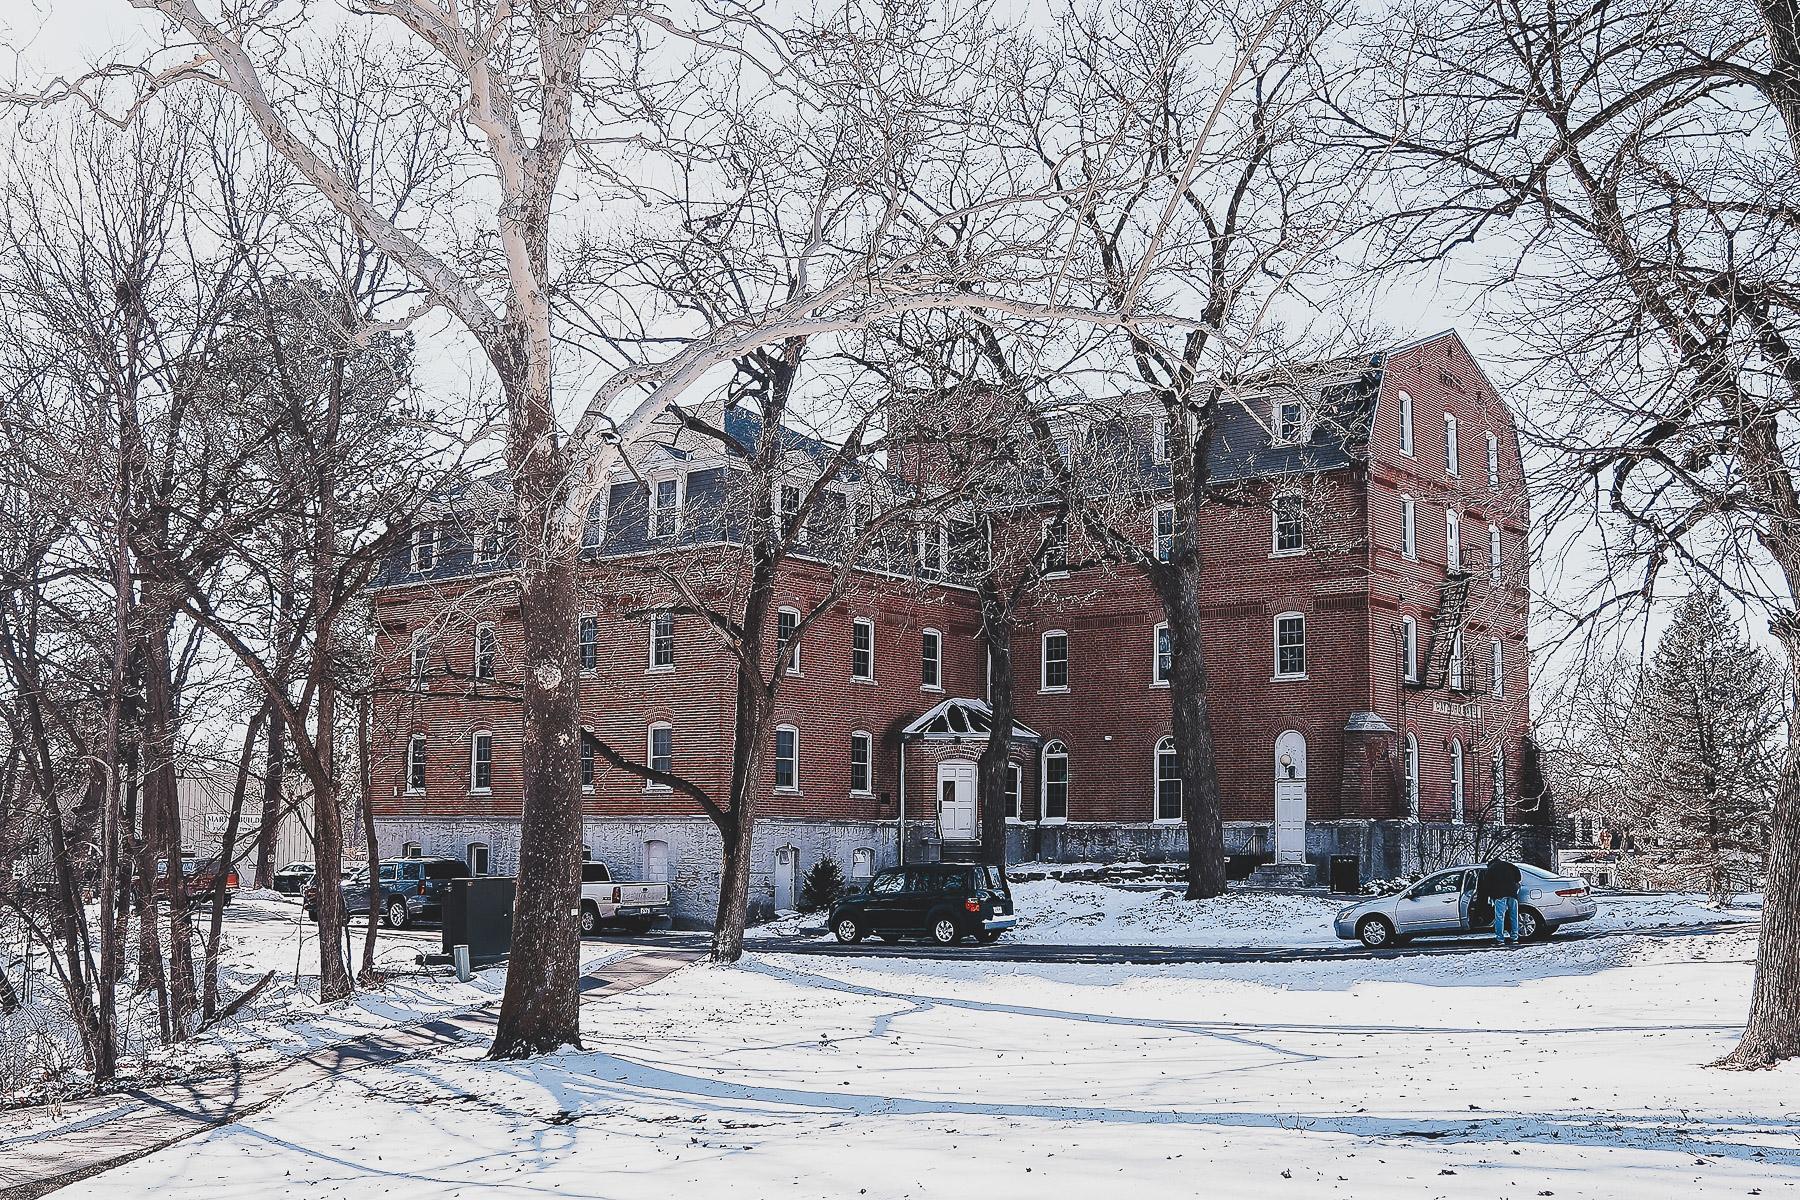 Image of Gaylord Hall, a stately building made of pink brick, set in a snowy landscape.